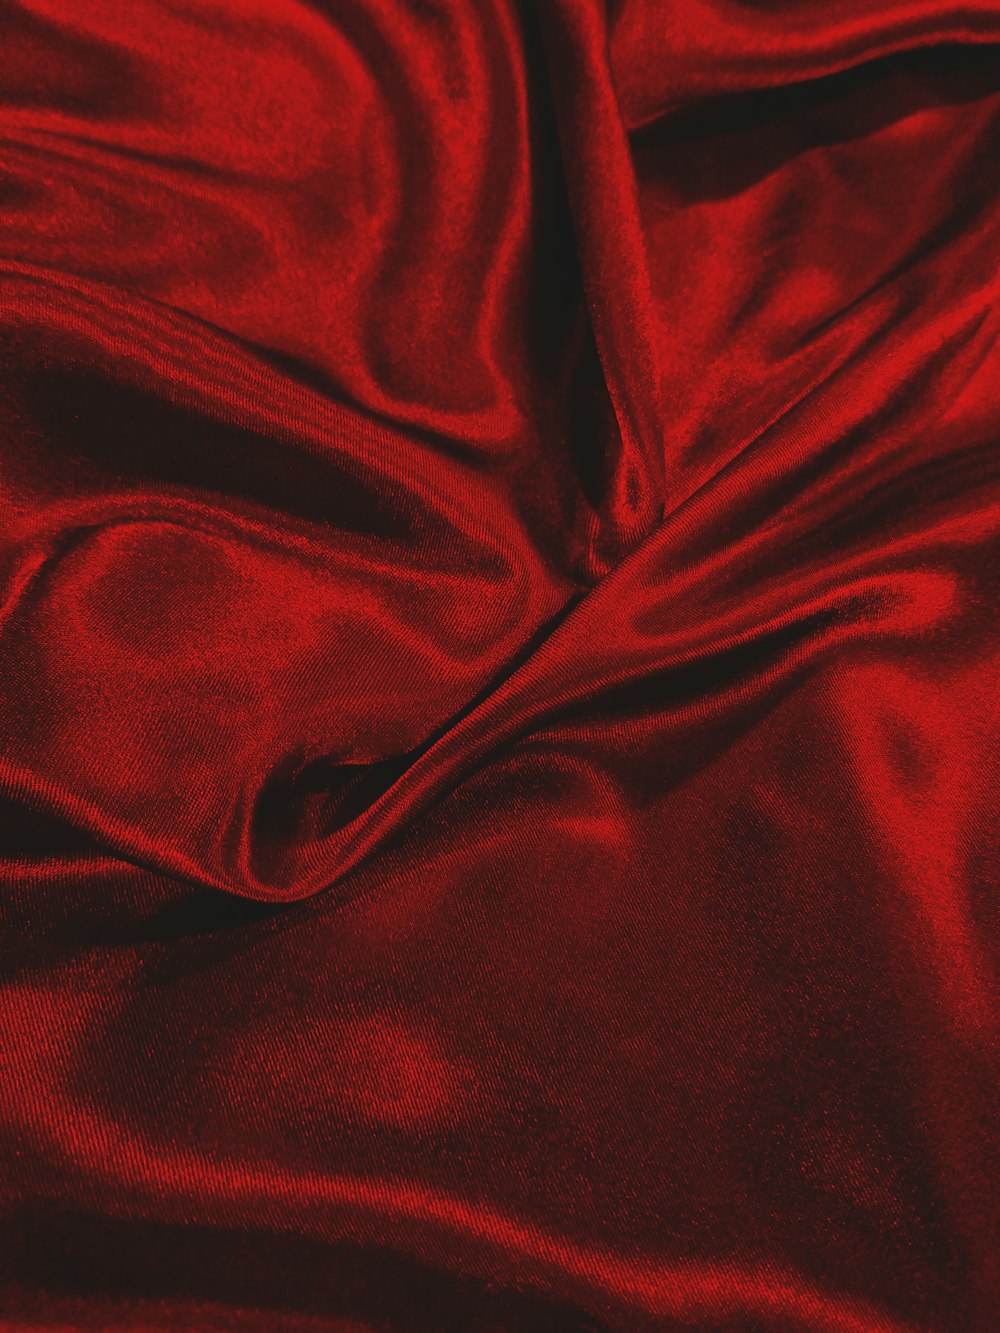 Red Wallpapers: Free HD Download [500+